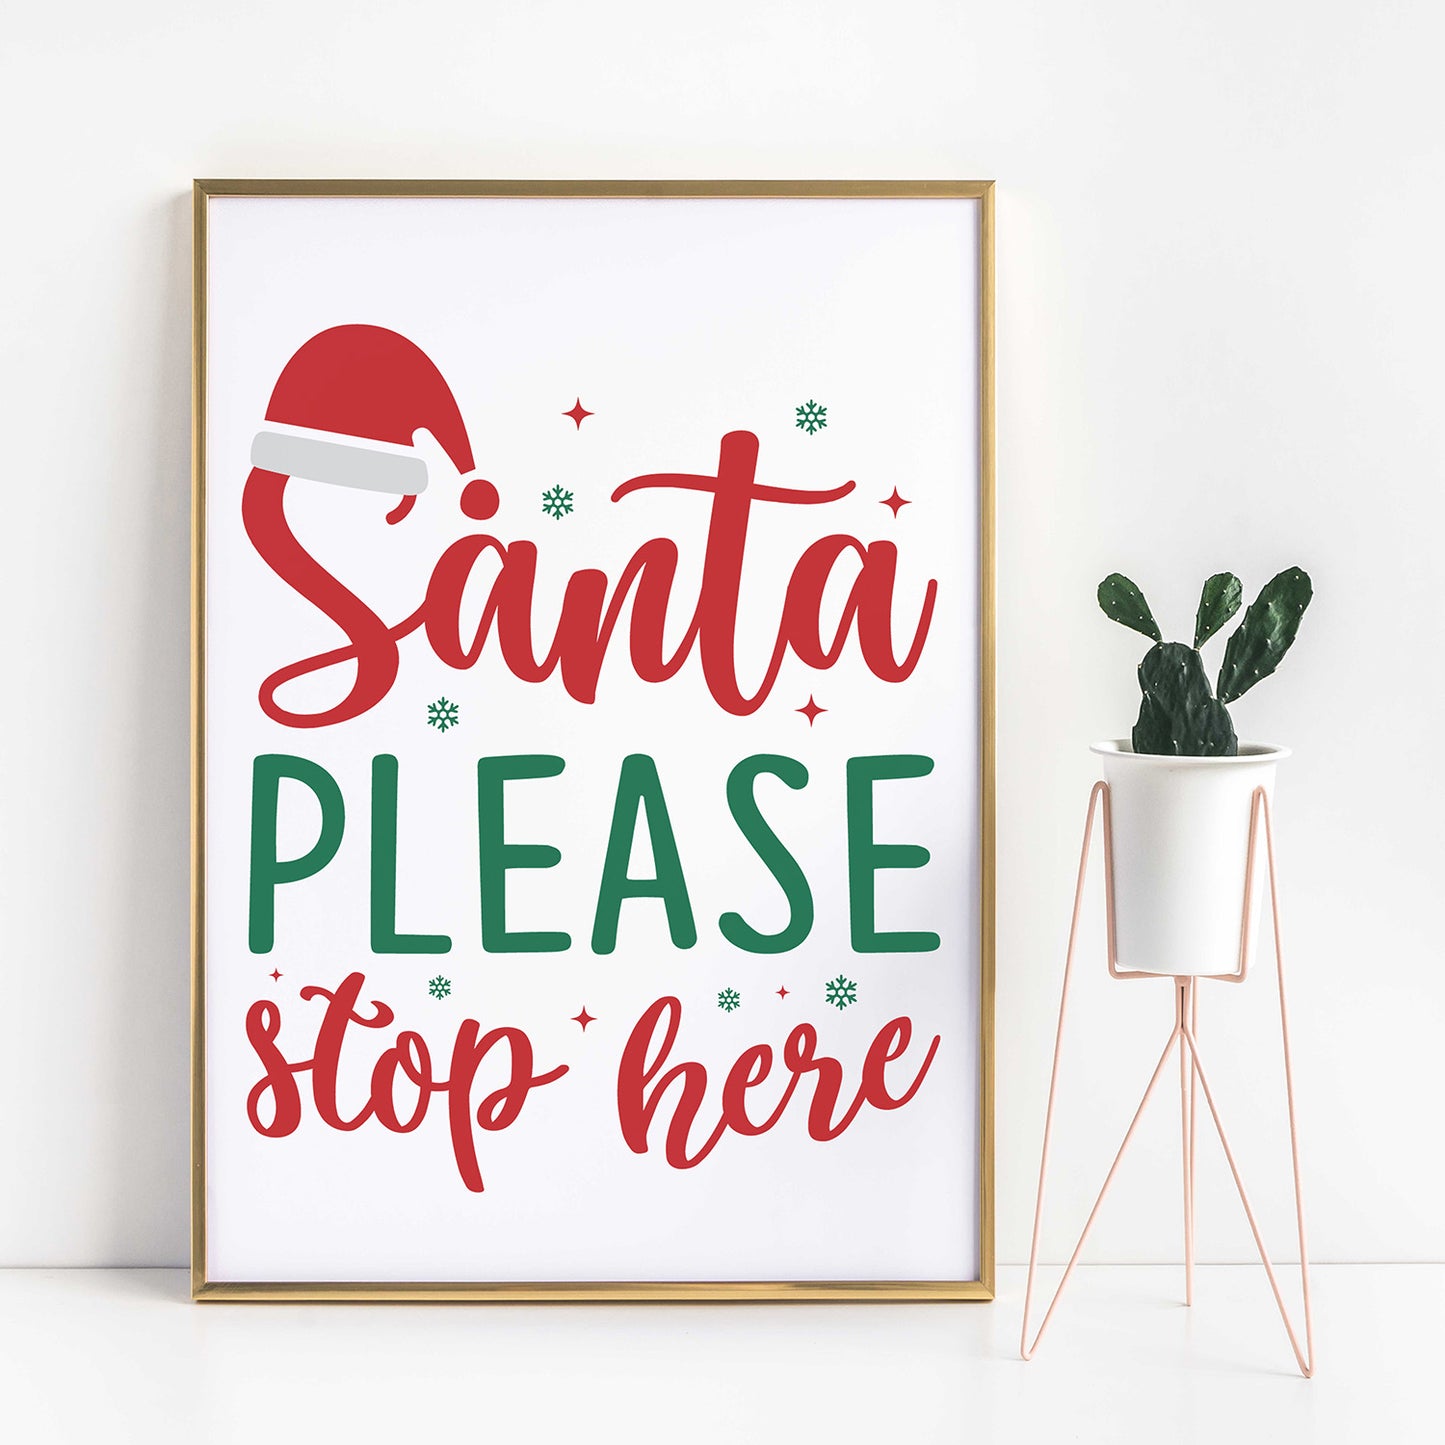 "Santa Please Stop Here" With Hat Graphic